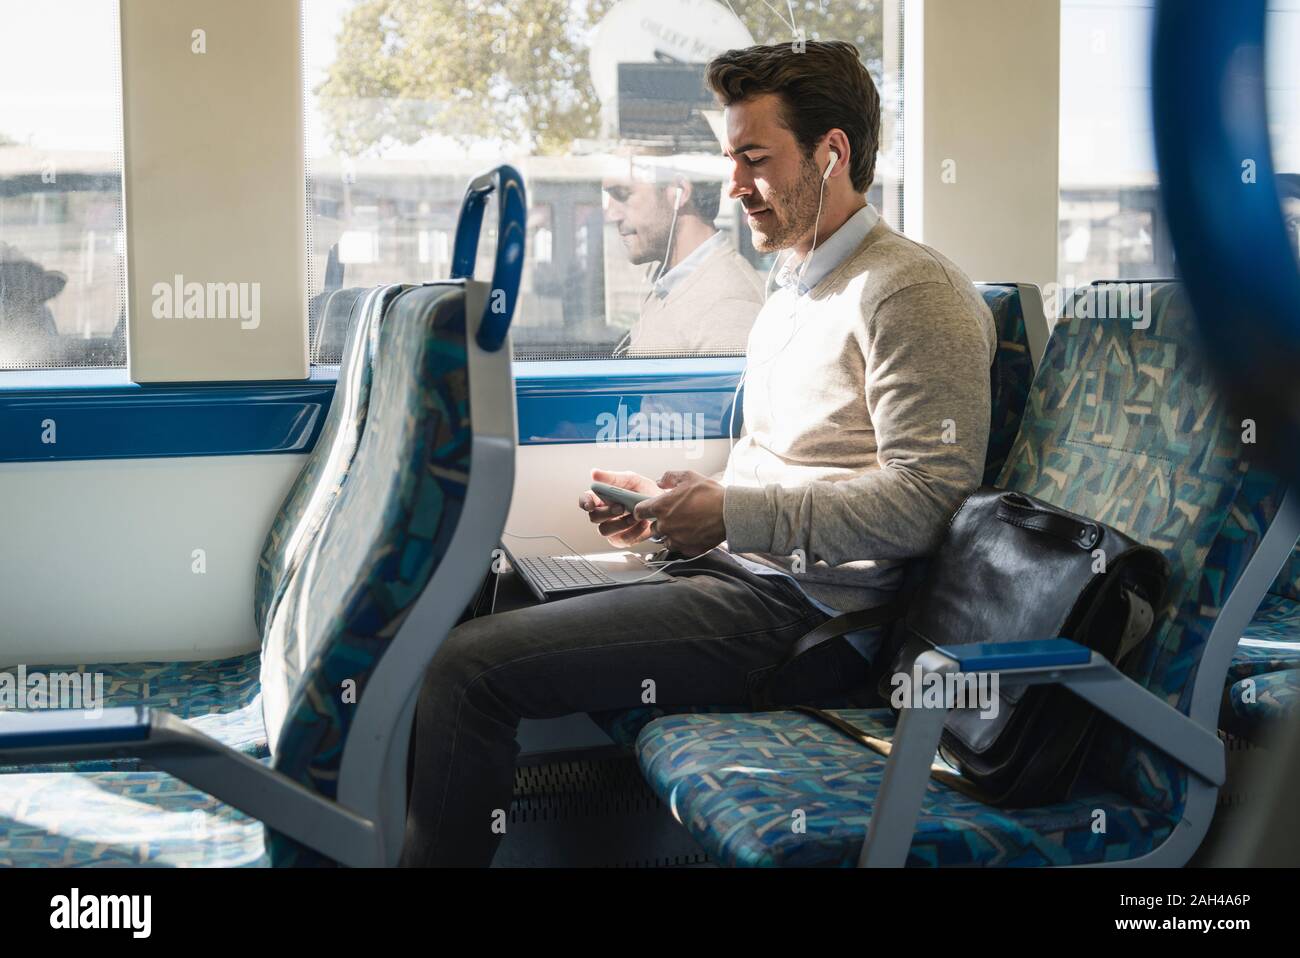 Young man with earphones using smartphone and tablet on a train Stock Photo